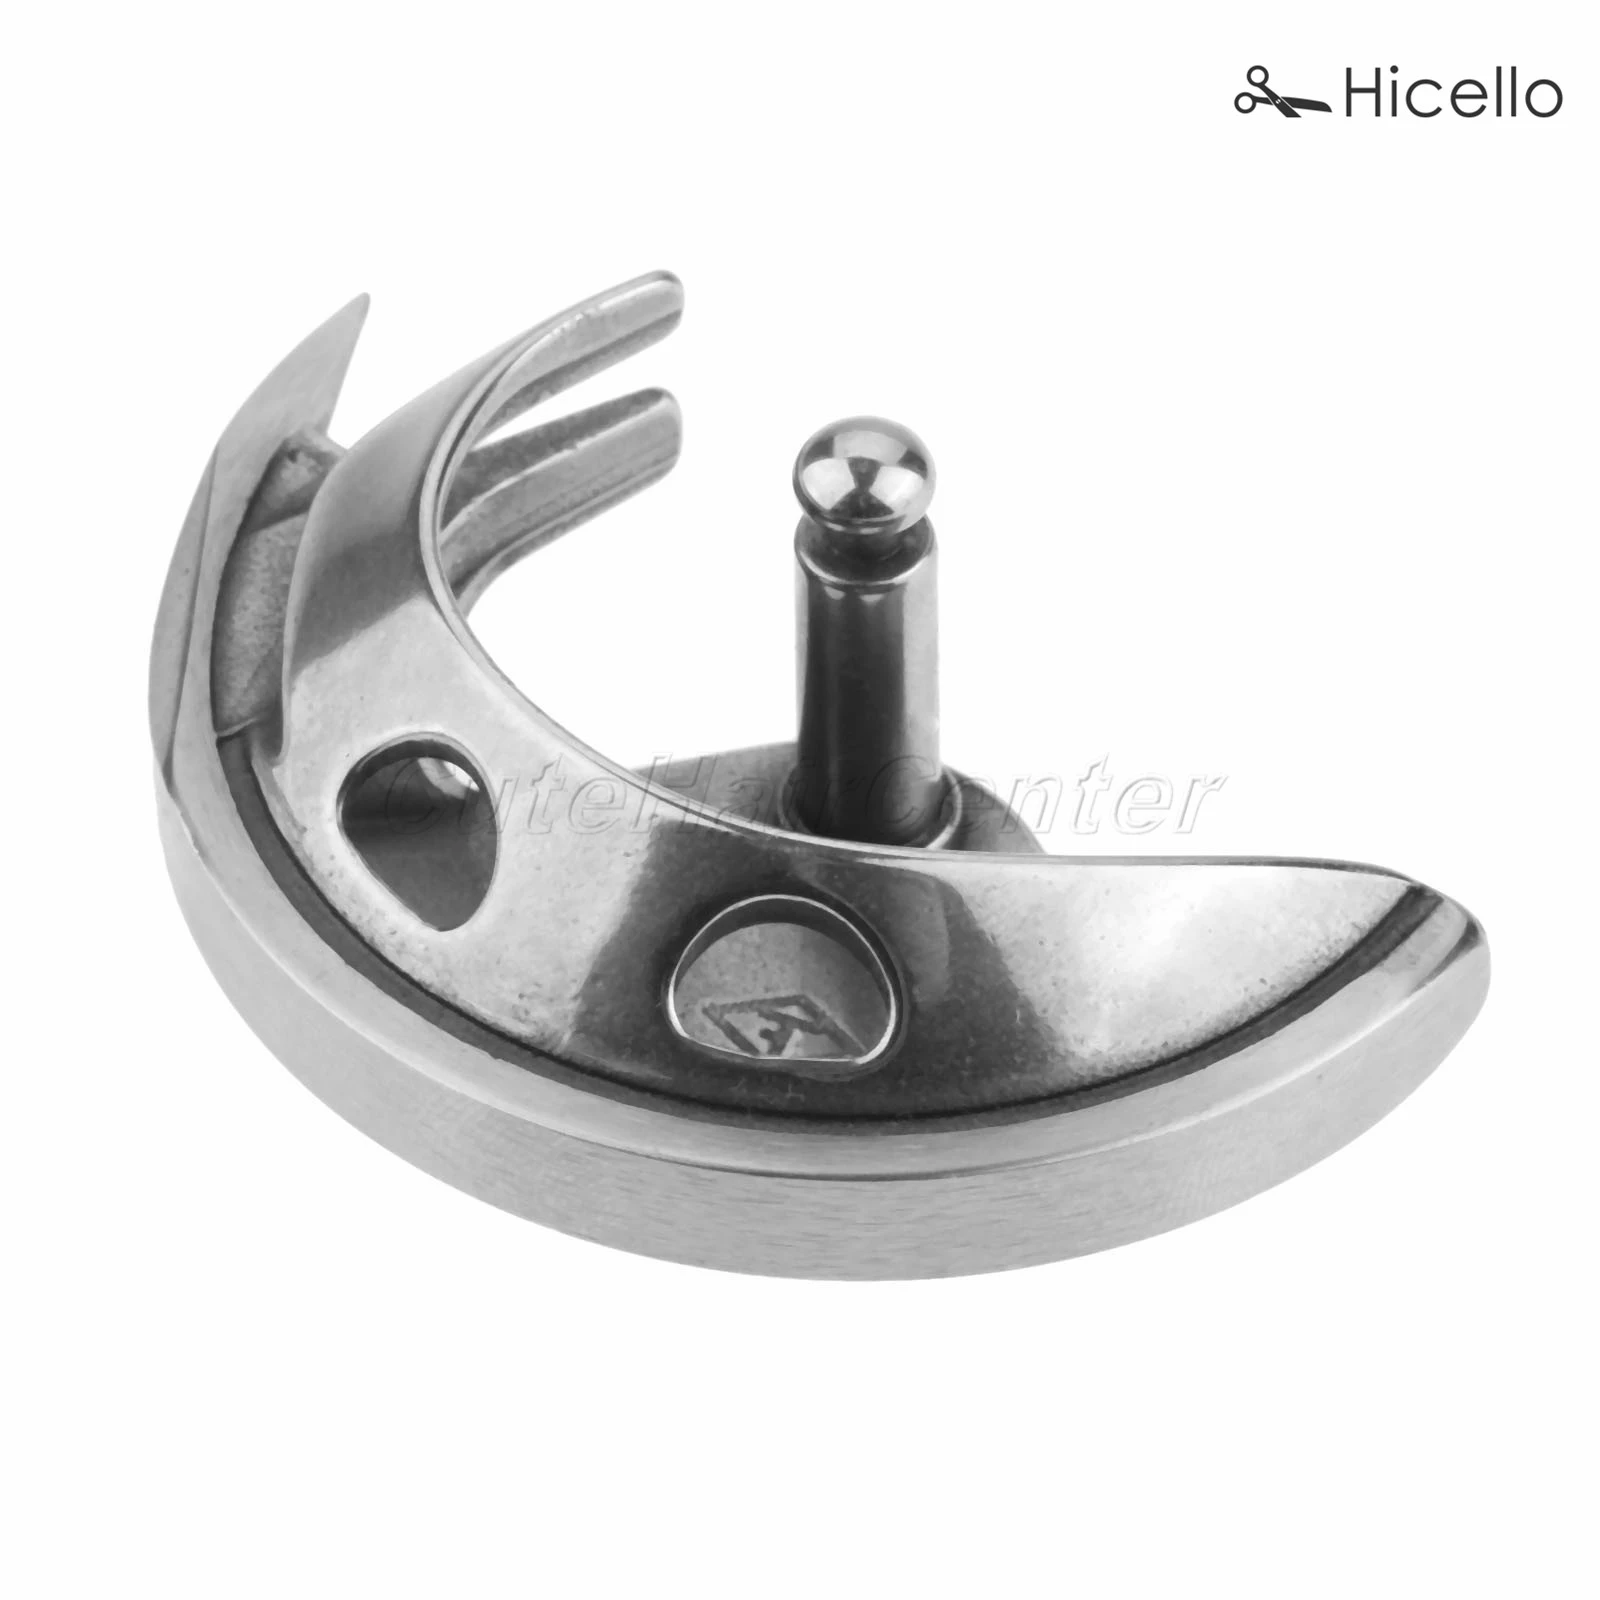 Shuttle hook JA2-1 R40 Old Household fashion Sewing Machine Steel Parts for Singer/Butterfly/Bernina/Janome/Flying Man/Bee